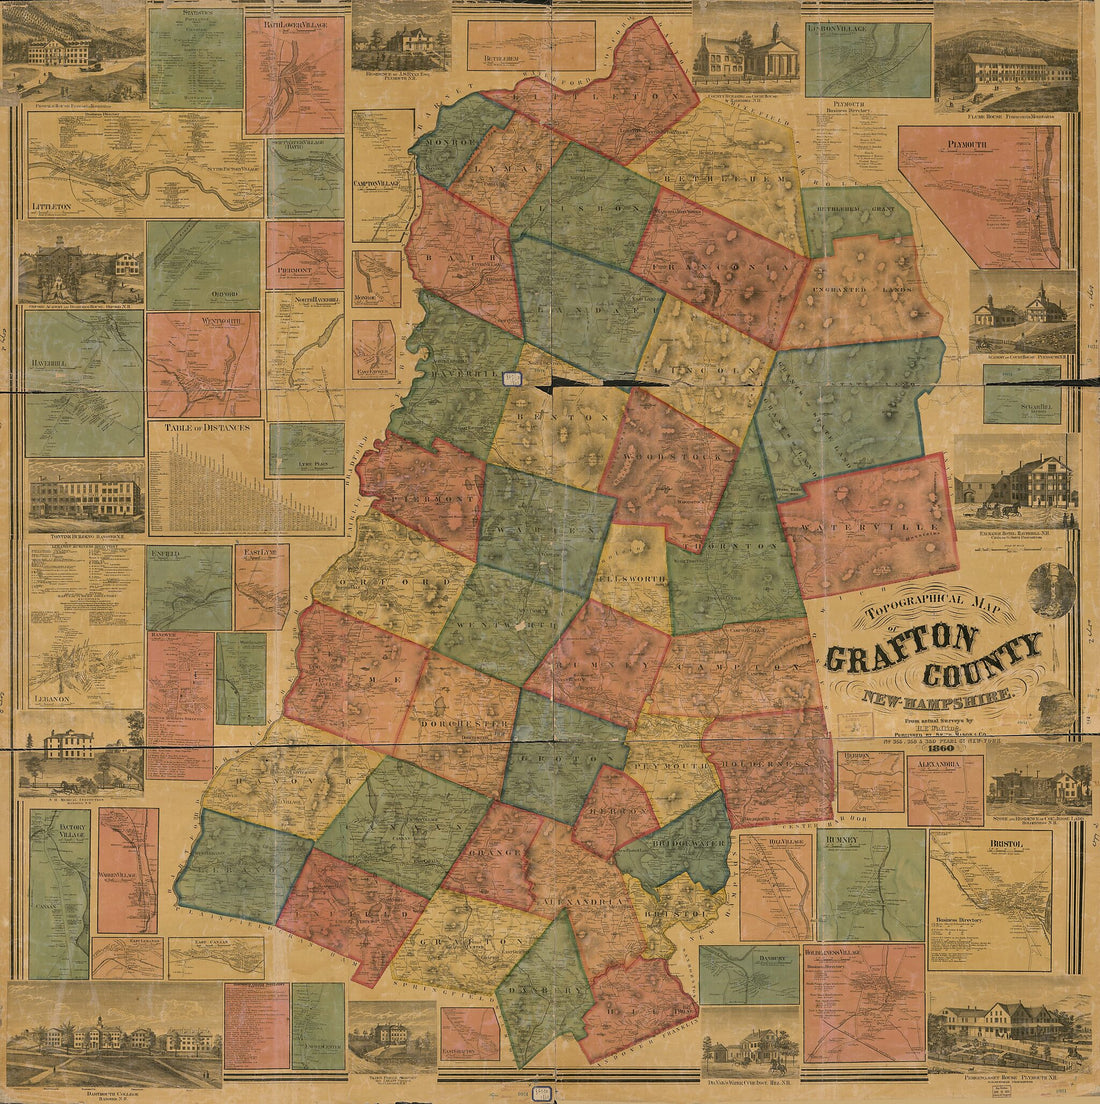 This old map of Topographical Map of Grafton County, New Hampshire (Grafton County, New Hampshire) from 1860 was created by Mason &amp; Co Smith, Henry Francis Walling in 1860